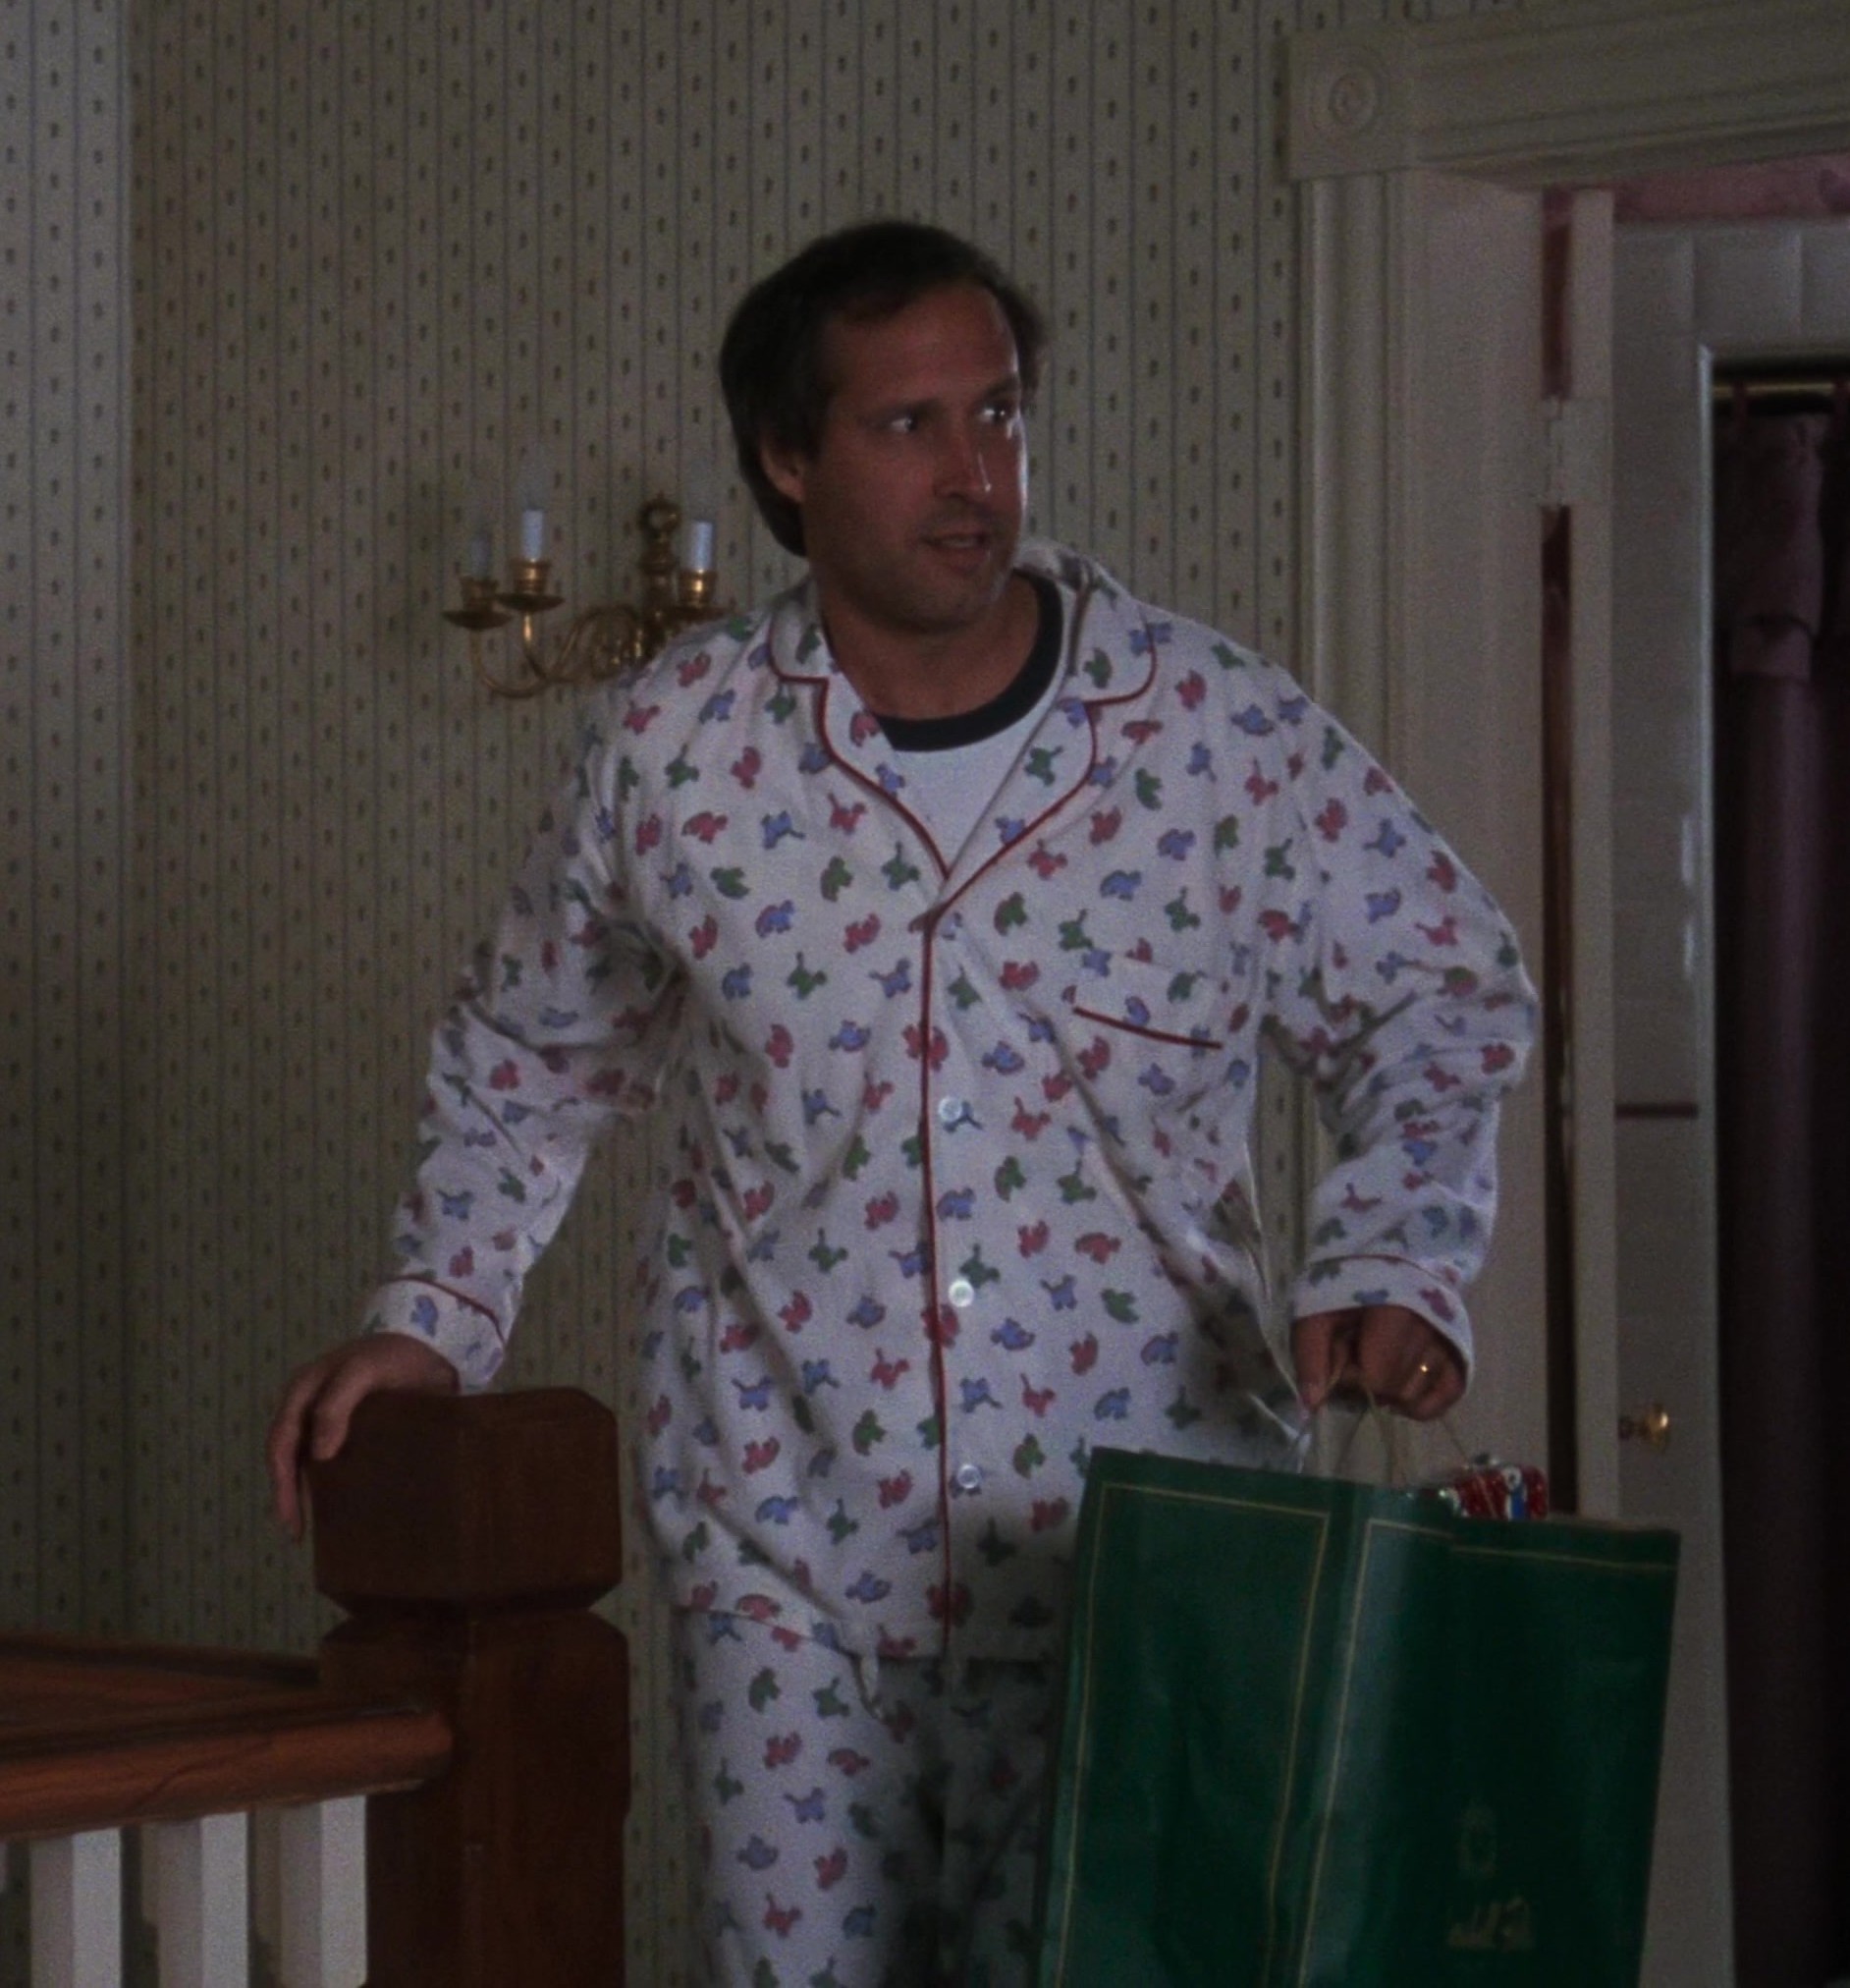 Worn on National Lampoon's Christmas Vacation (1989) Movie - Classic Button-Up Pajama Set with Festive Dinosaur Print Worn by Chevy Chase as Clark W. "Sparky" Griswold Jr.